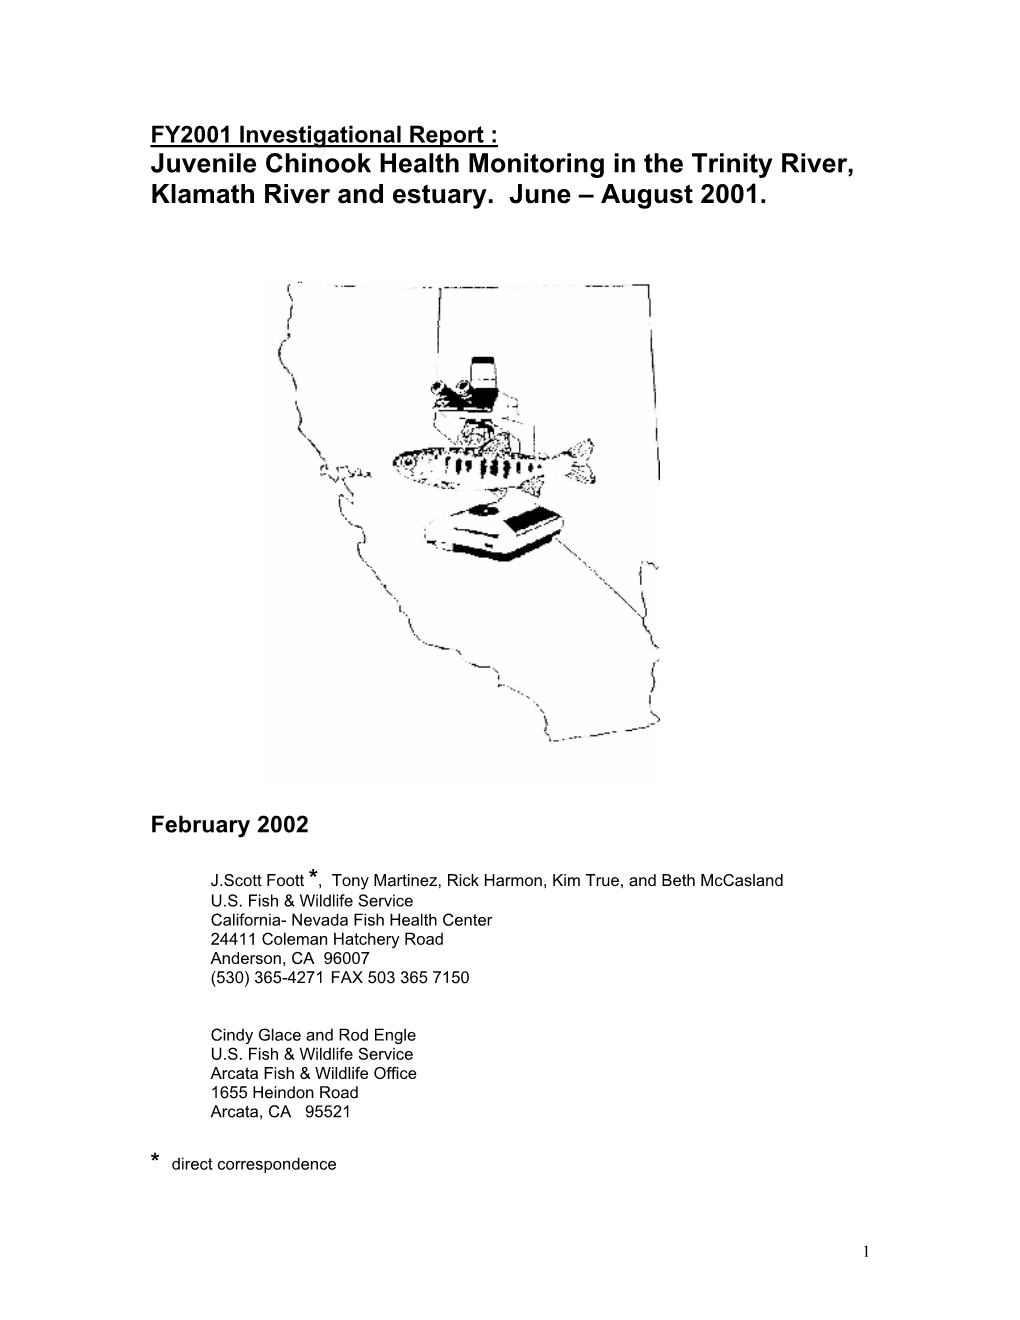 Juvenile Chinook Health Monitoring in the Trinity River, Klamath River and Estuary